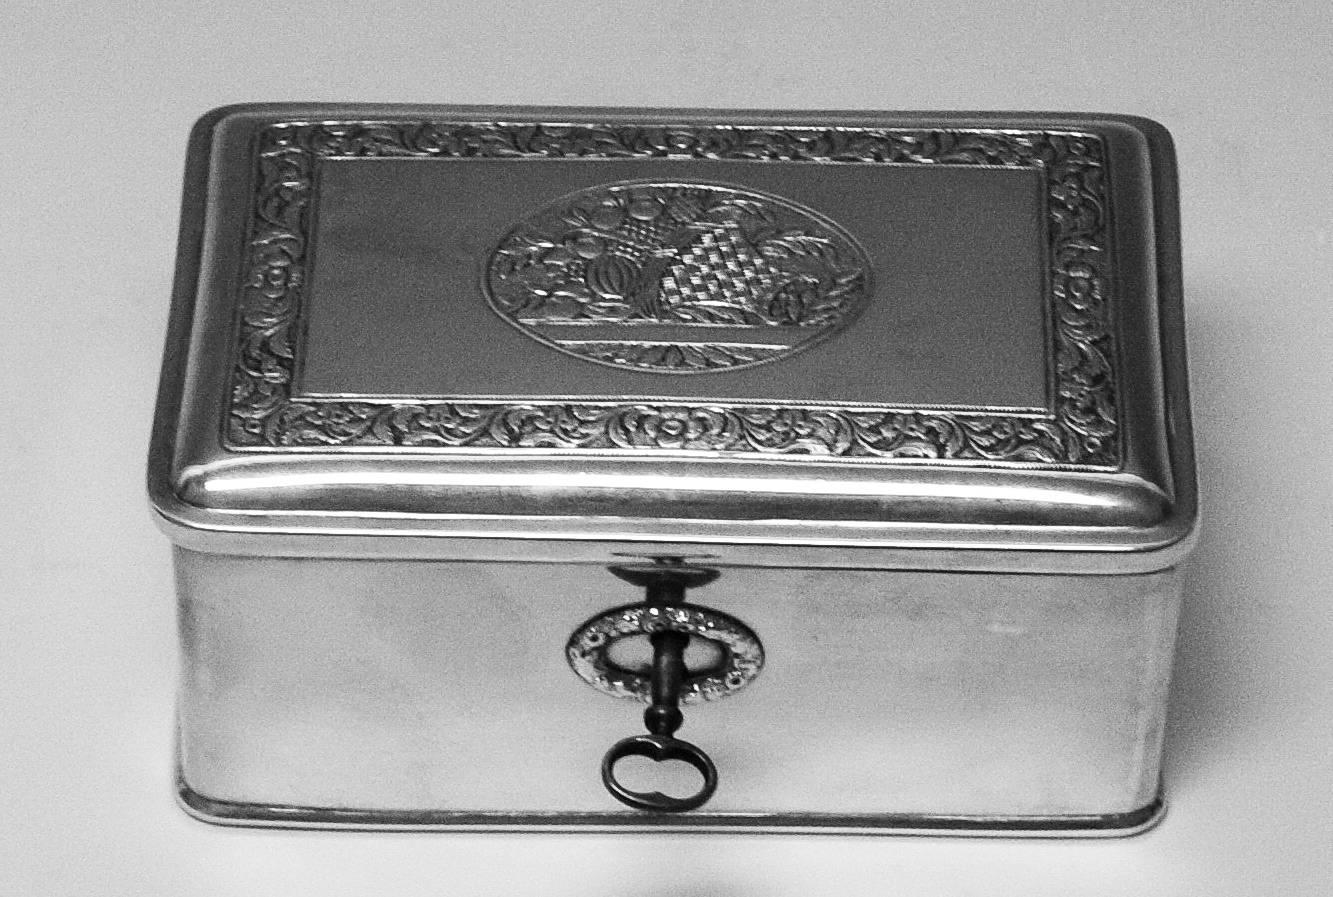 Austrian Biedermeier silver sugar box 
This sugar box / chest was made during Famous Viennese Biedermeier Period (circa 1833-1839). 

Excellently manufactured sugar box / sugar chest of rectangular shape (with straight walls and rounded